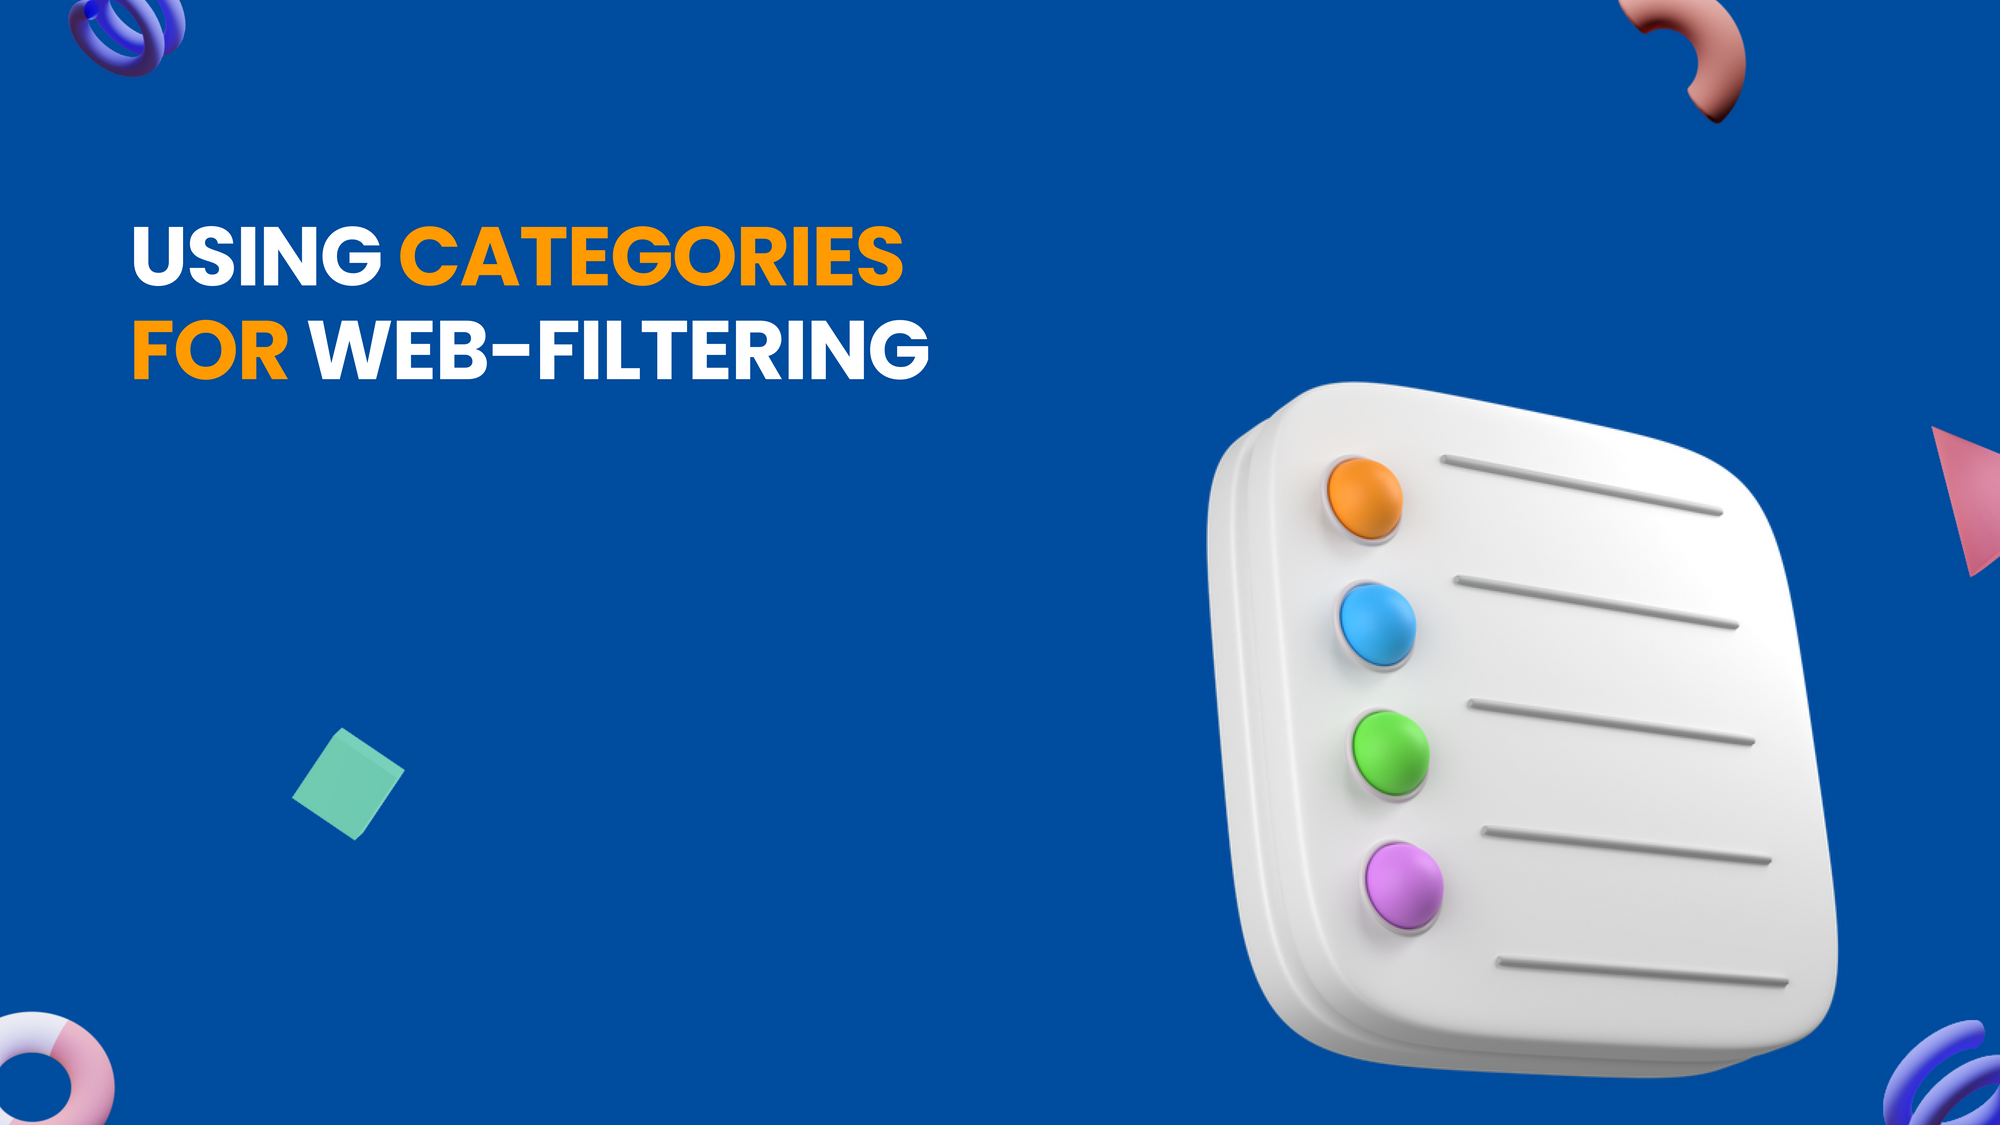 Using Categories for Web-Filtering